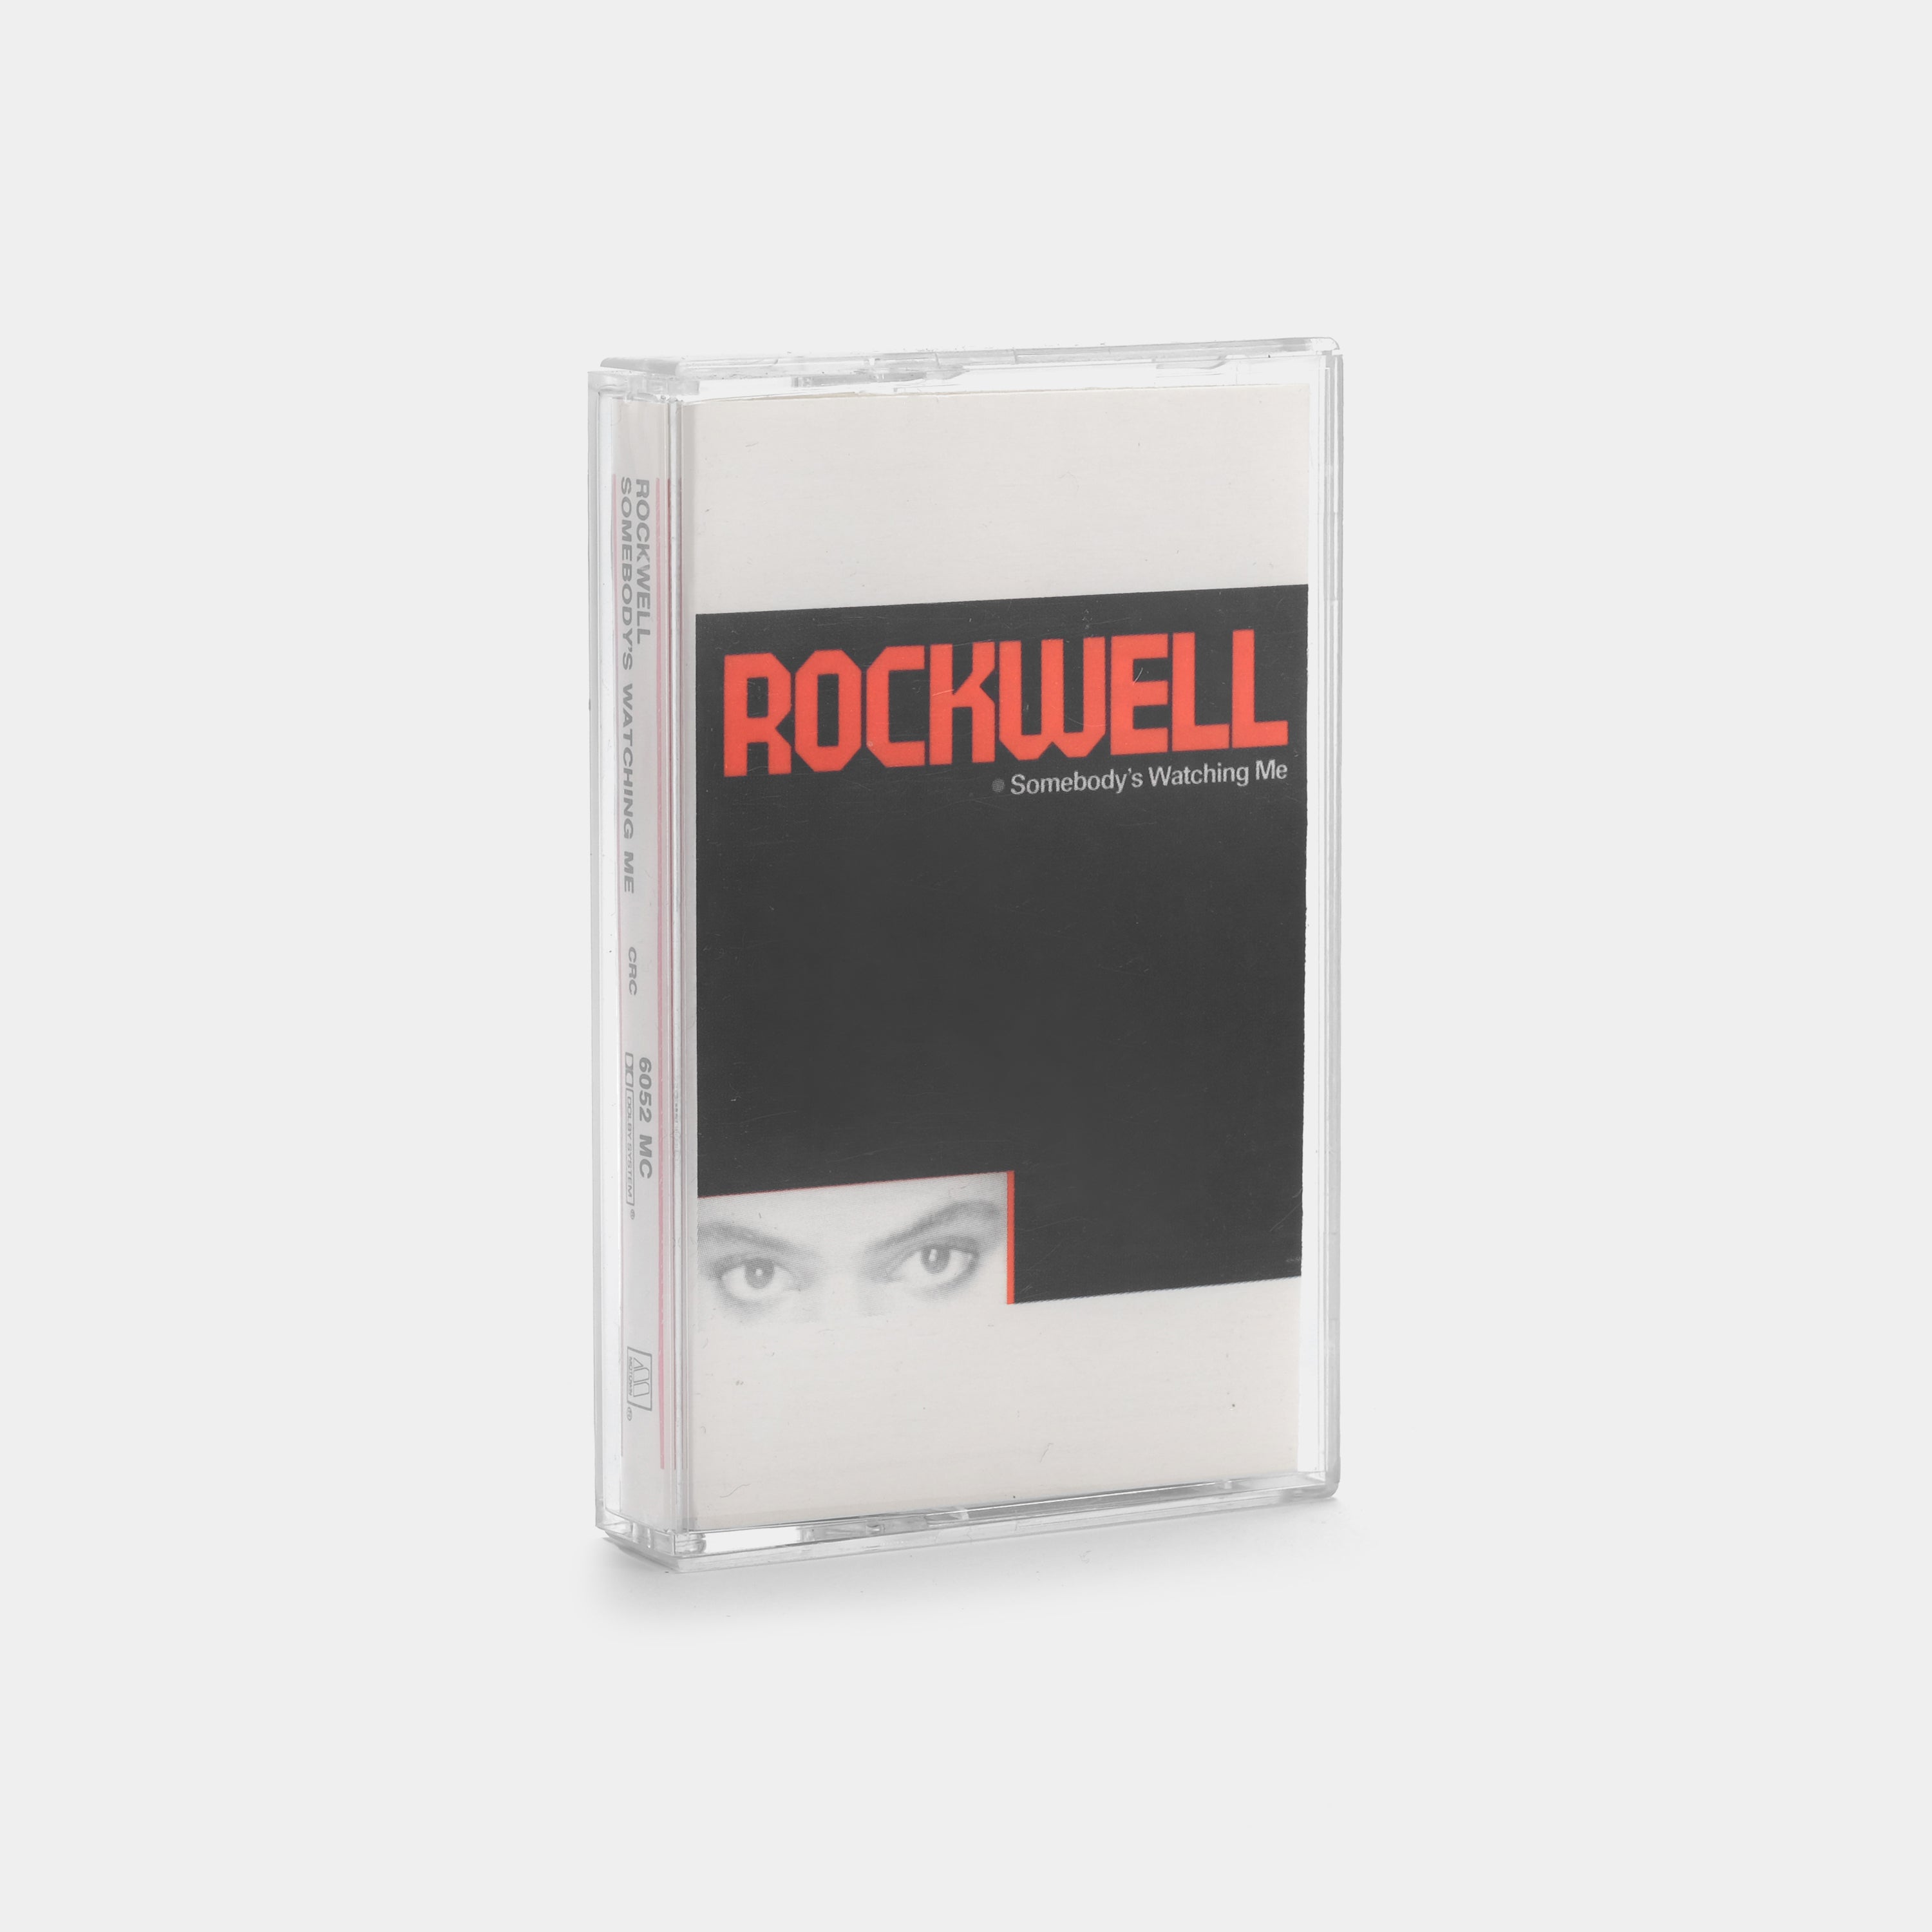 Rockwell - Somebody's Watching Me Cassette Tape